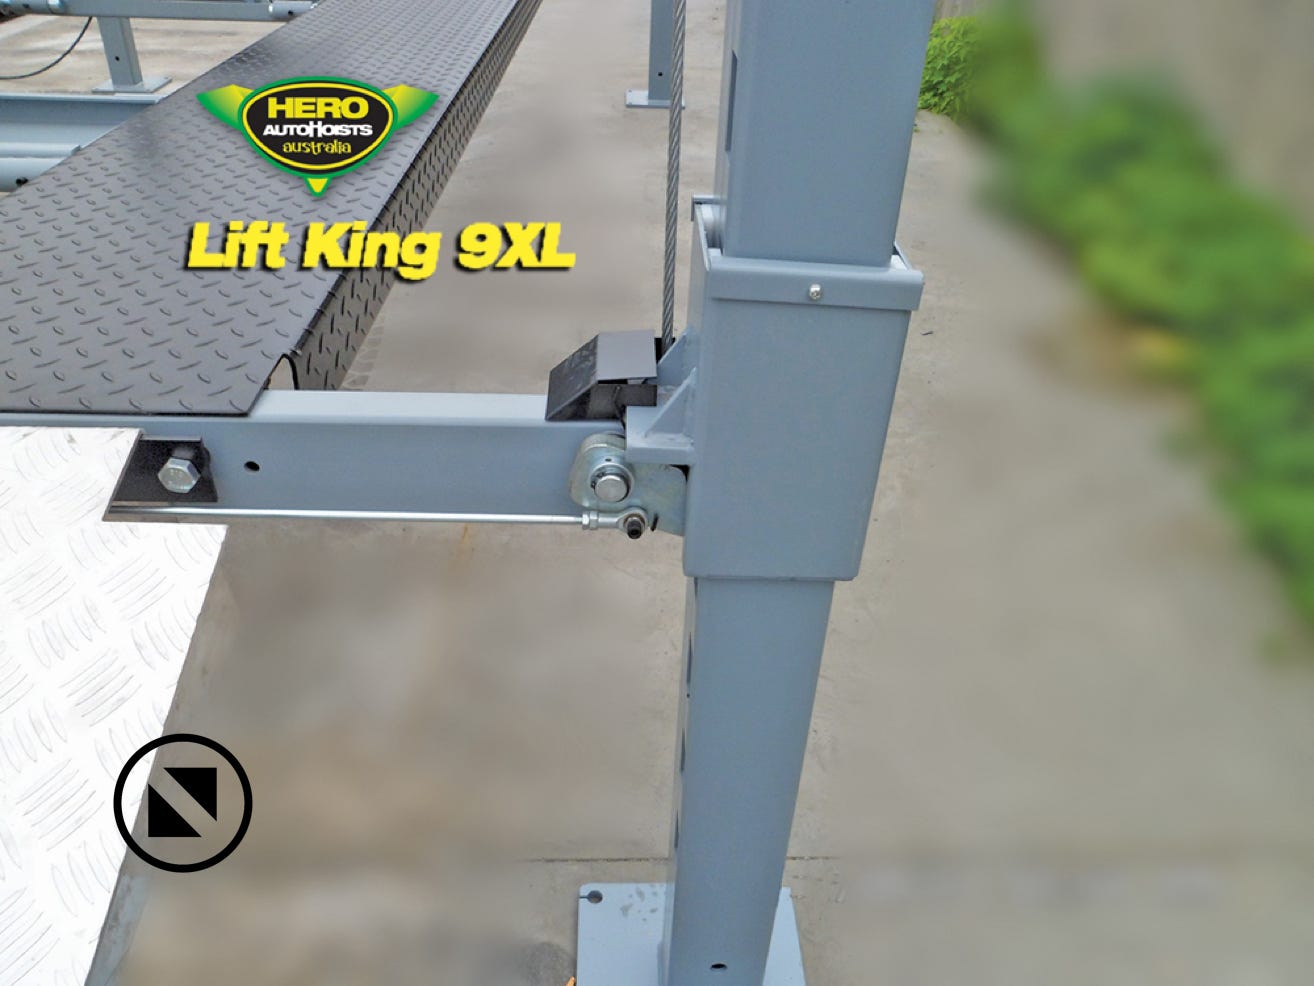 Lift King 9XL / 4000kgs / Freestanding & Portable / 3rd-Gen Wrap-Around Crossbars significantly increase rigidity...